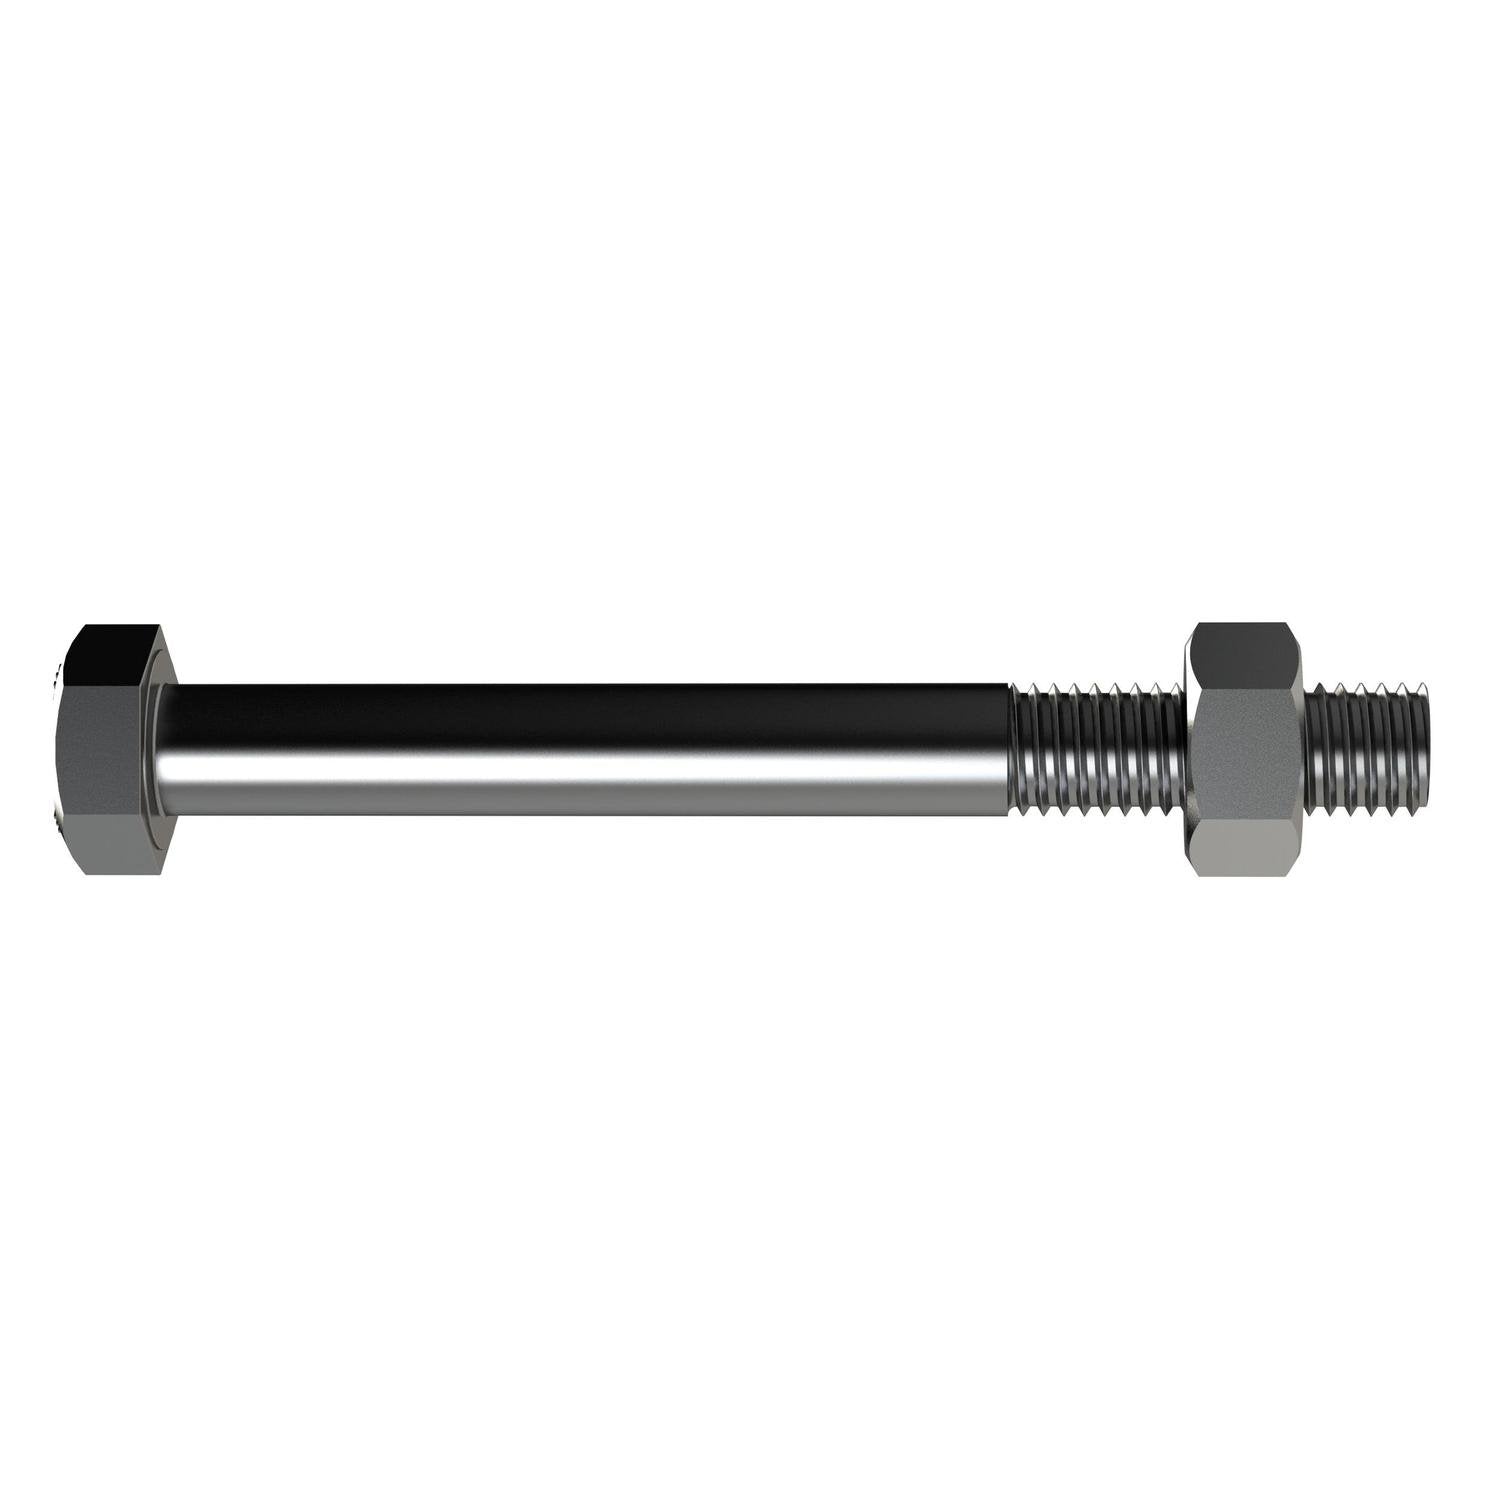 Bremick Engineer Bolts M12 X 180Mm Stainless Steel 316 (25 Pack)